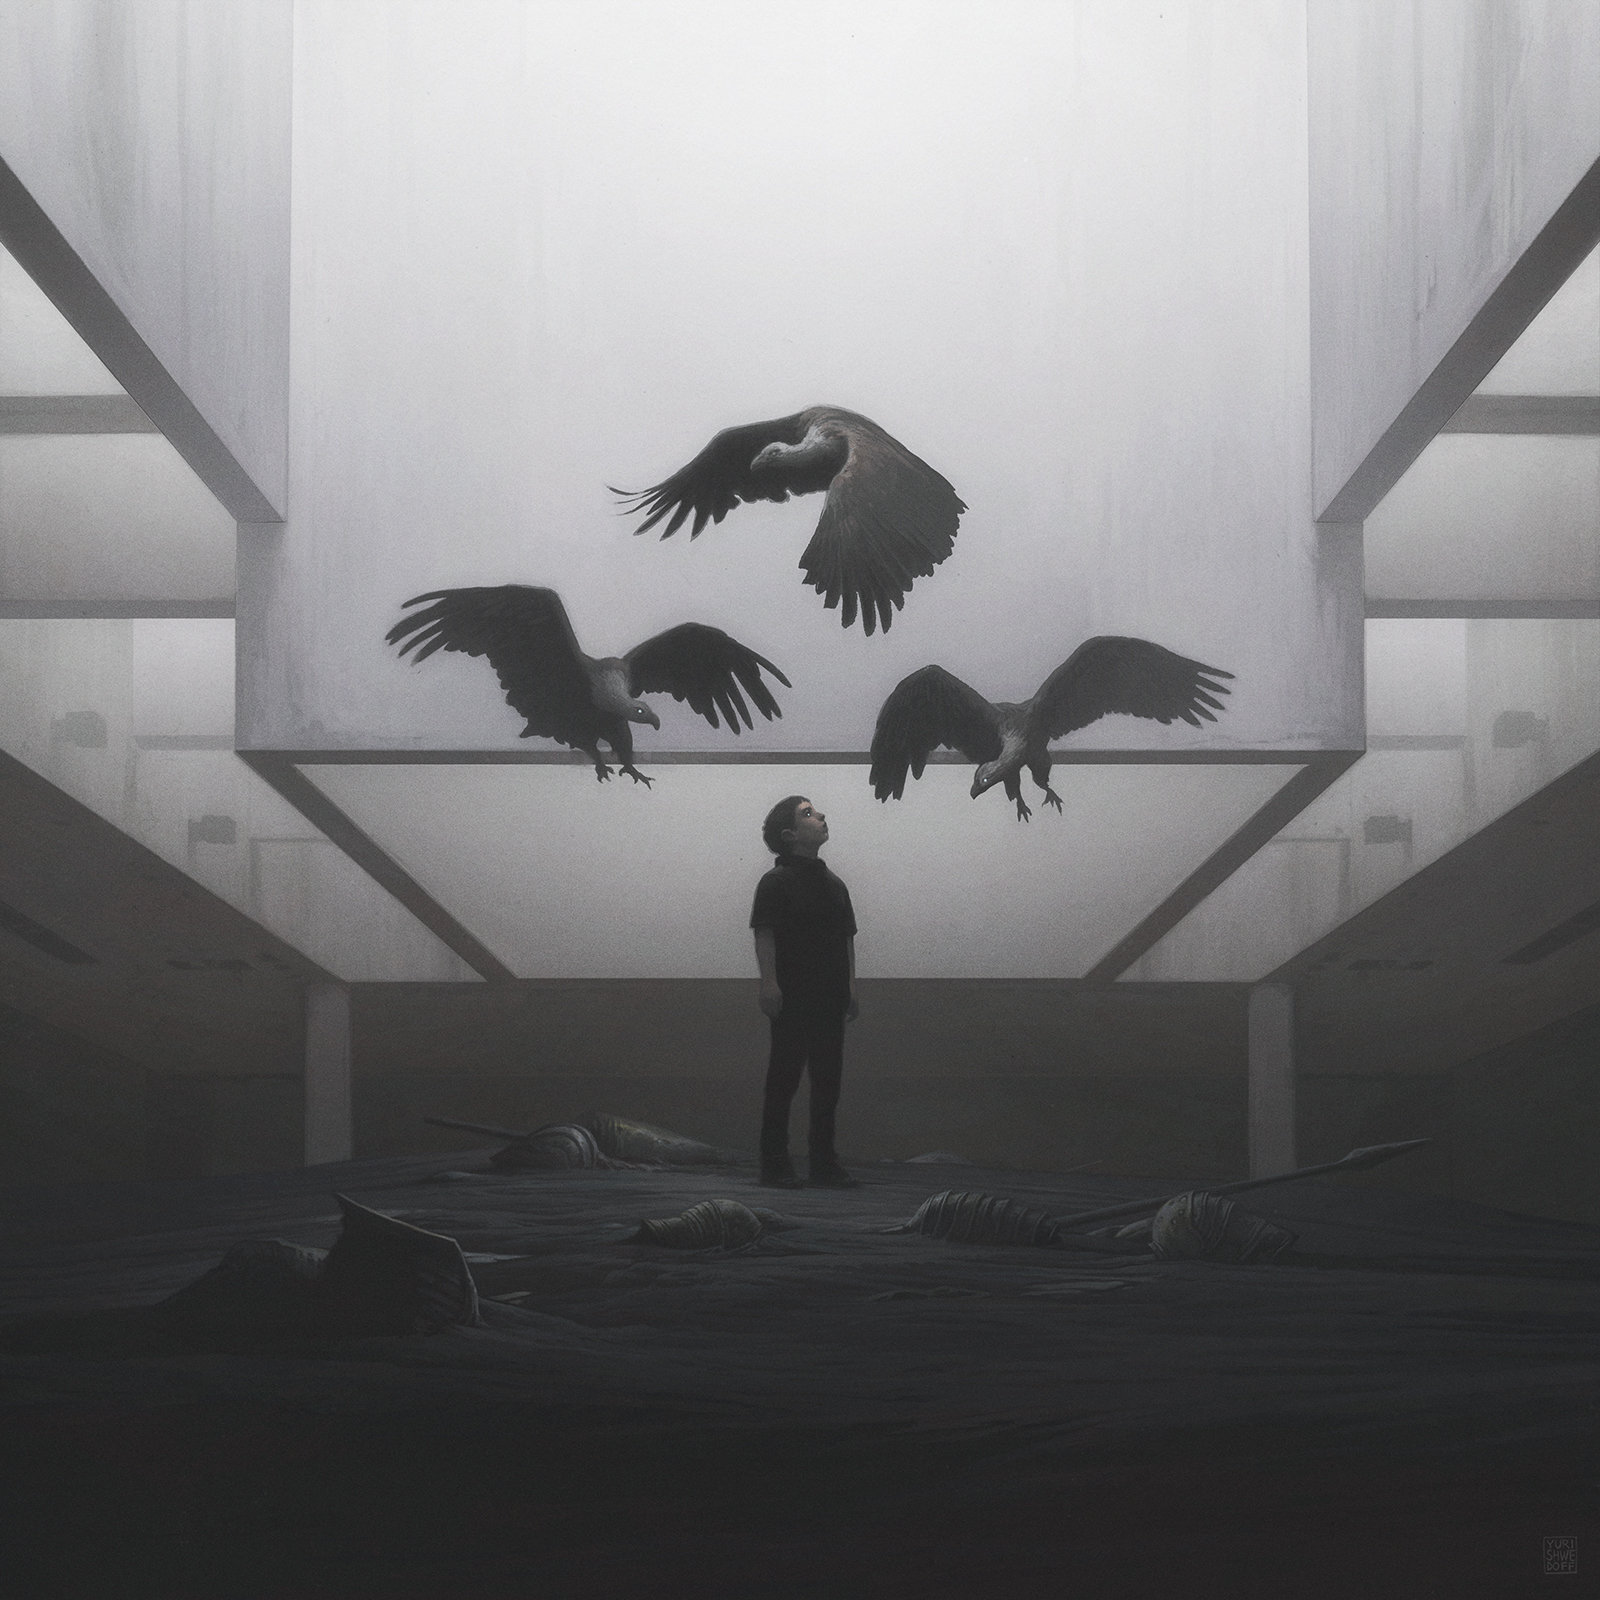 [Reflexion] Les oeuvres qui vous inspirent - Page 2 Yuri-shwedoff-vultures